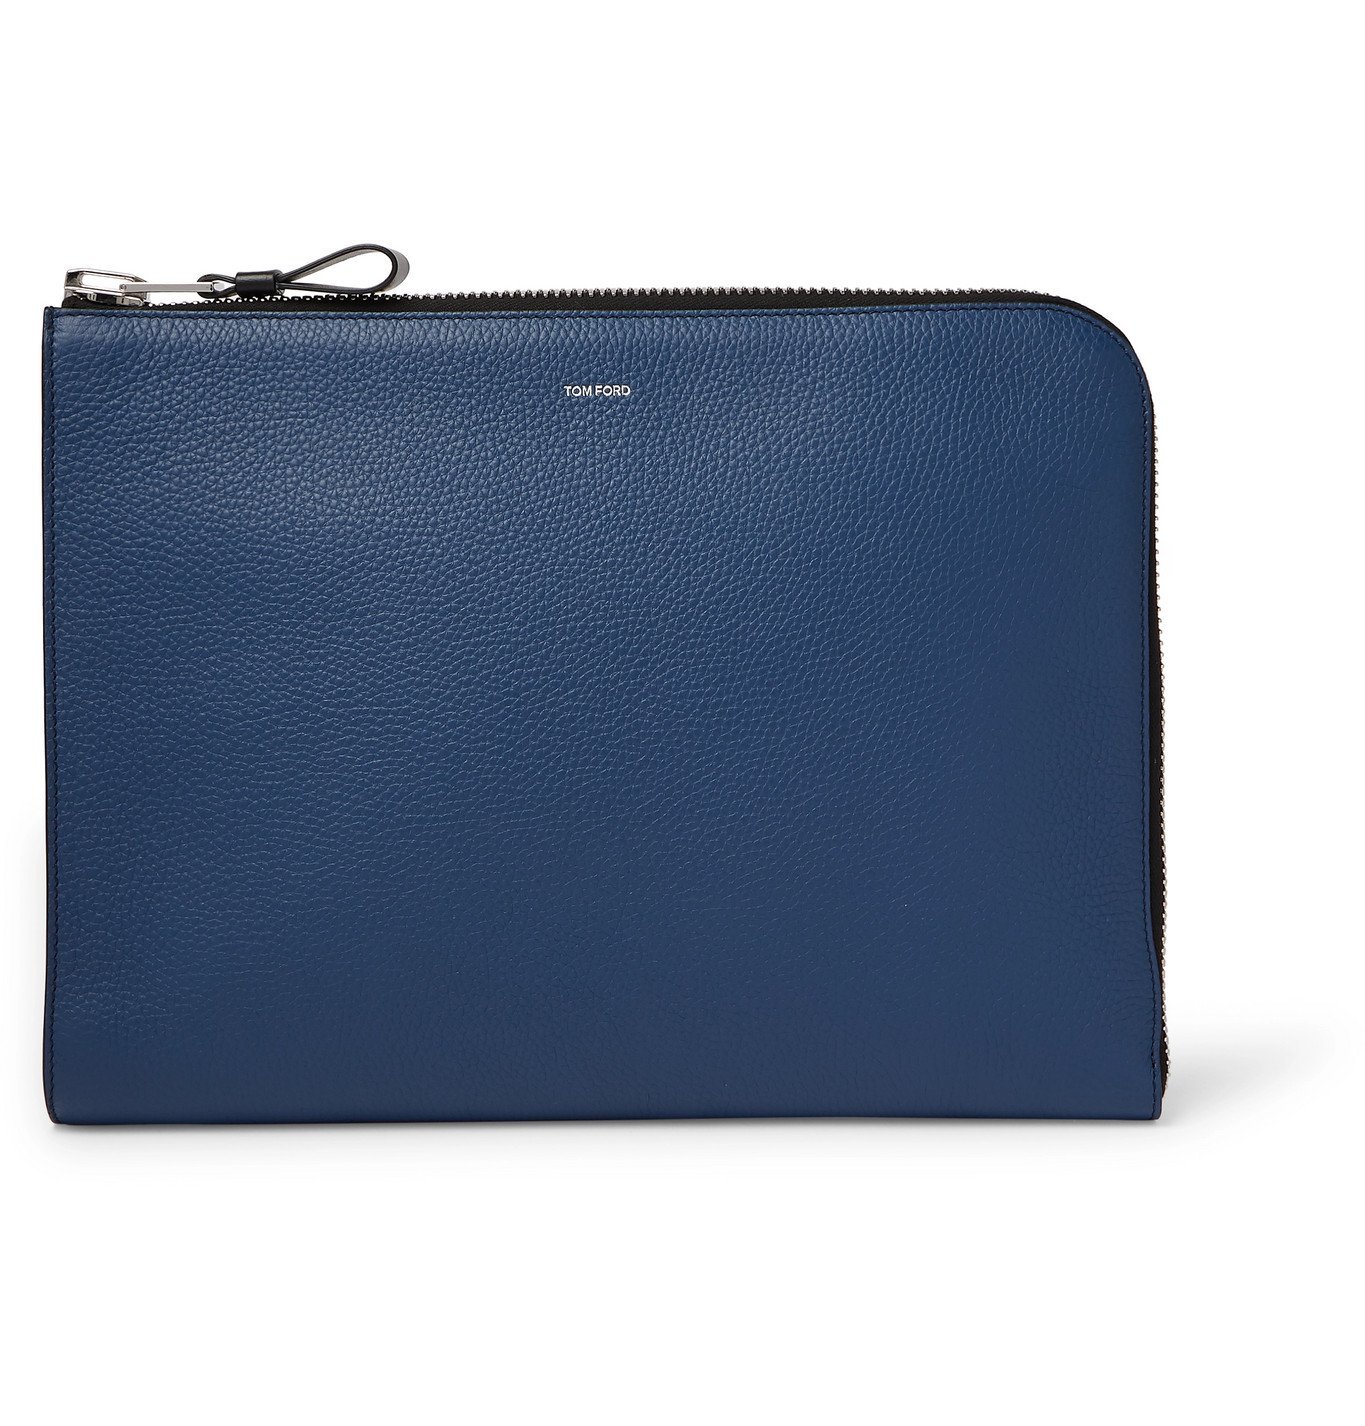 TOM FORD - Full-Grain Leather Pouch - Blue TOM FORD